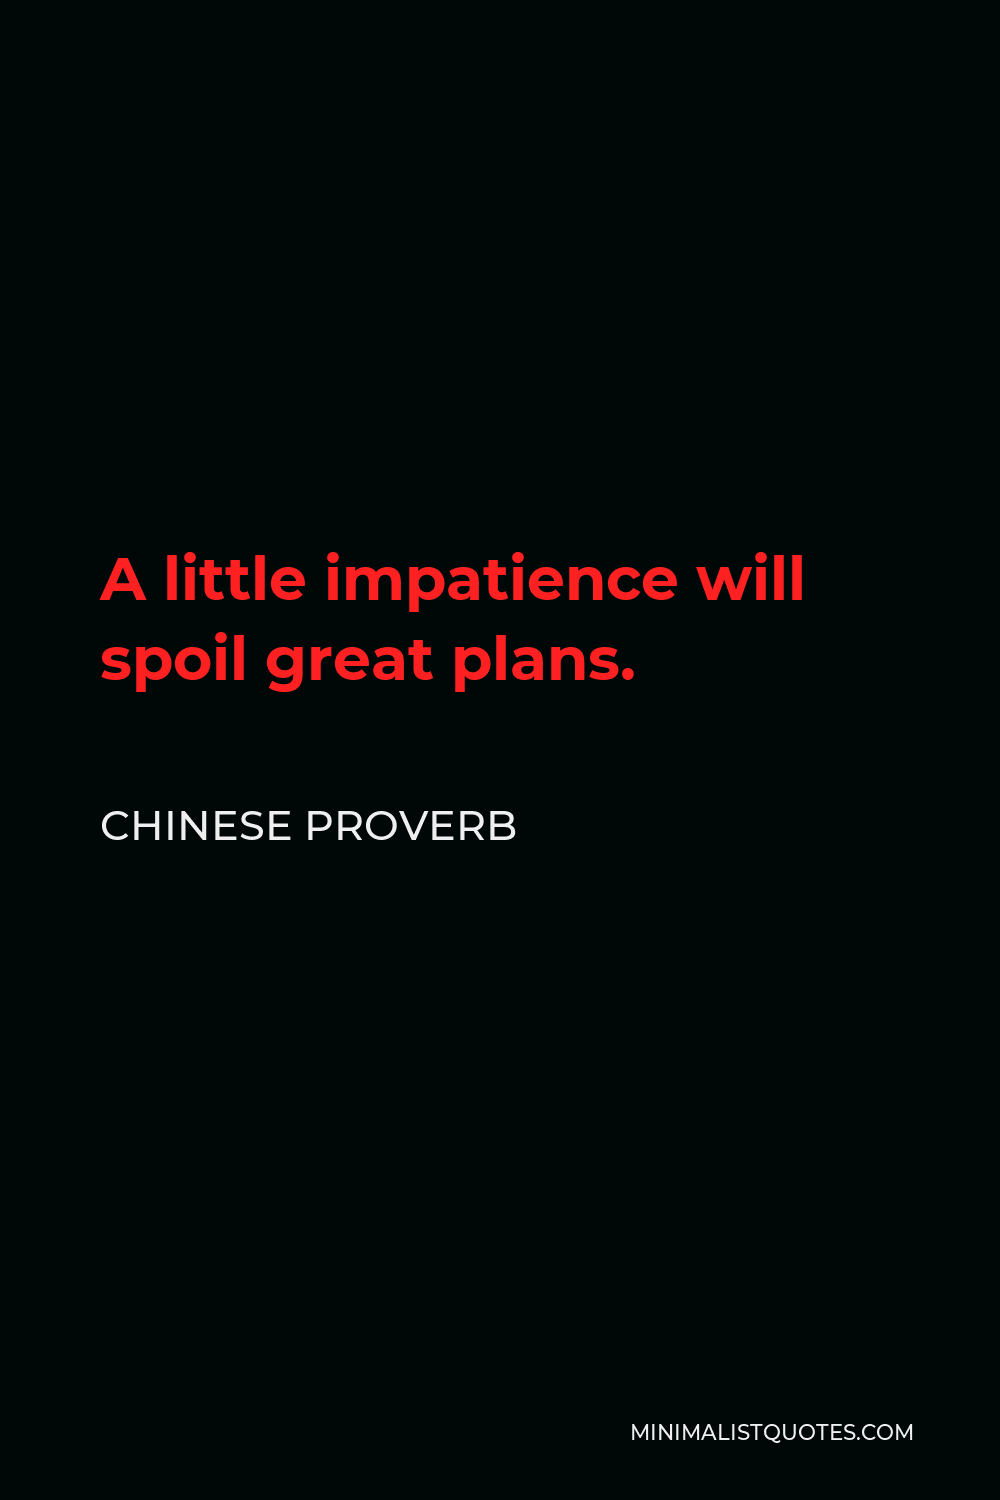 Chinese Proverb Quote - A little impatience will spoil great plans.